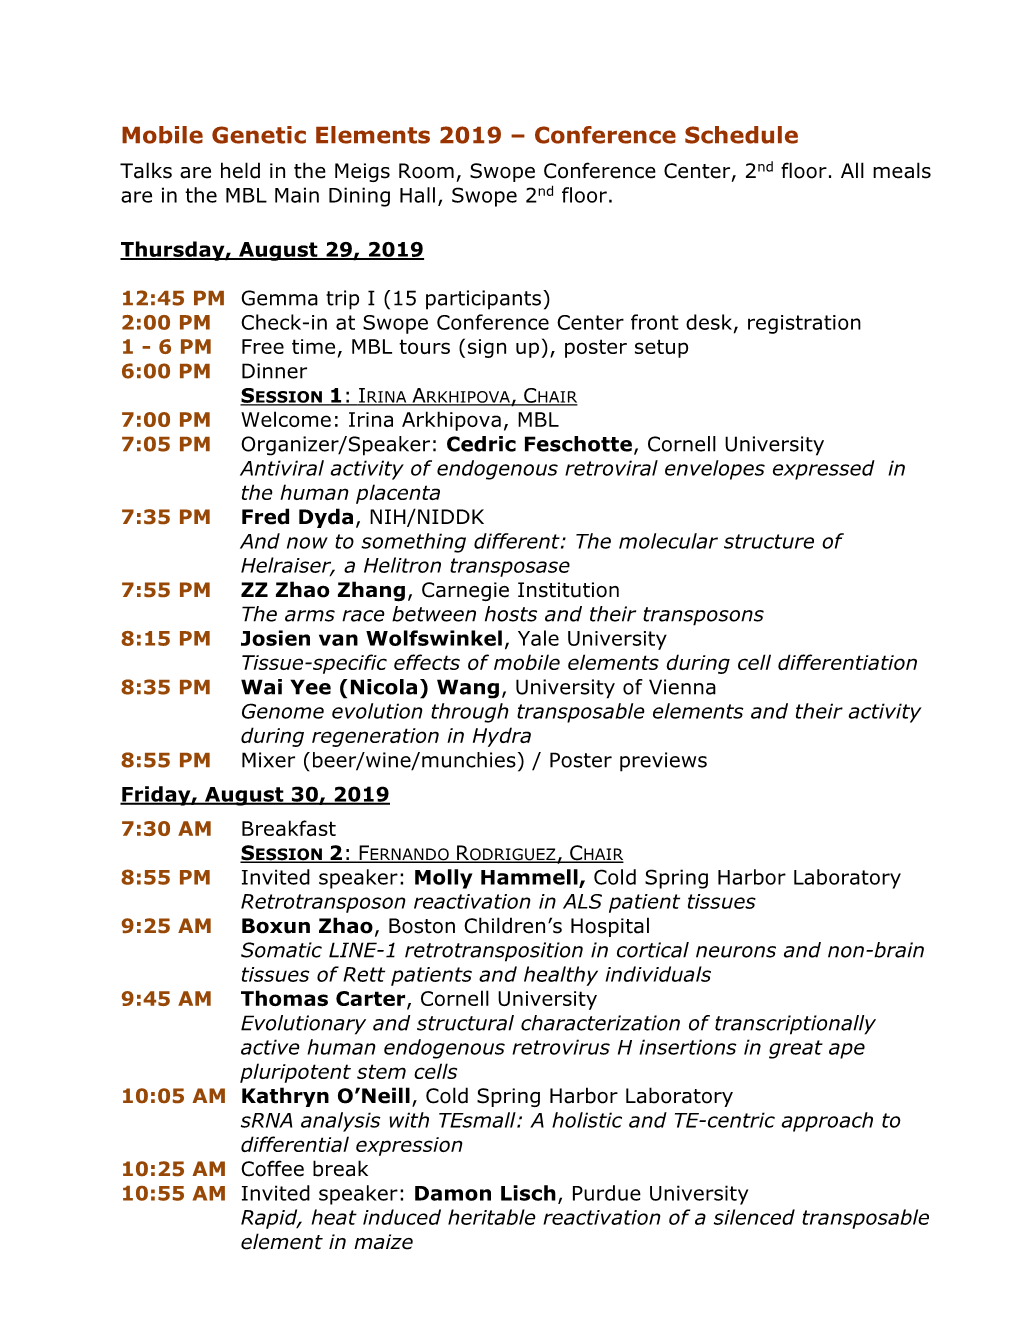 Mobile Genetic Elements 2019 – Conference Schedule Talks Are Held in the Meigs Room, Swope Conference Center, 2Nd Floor